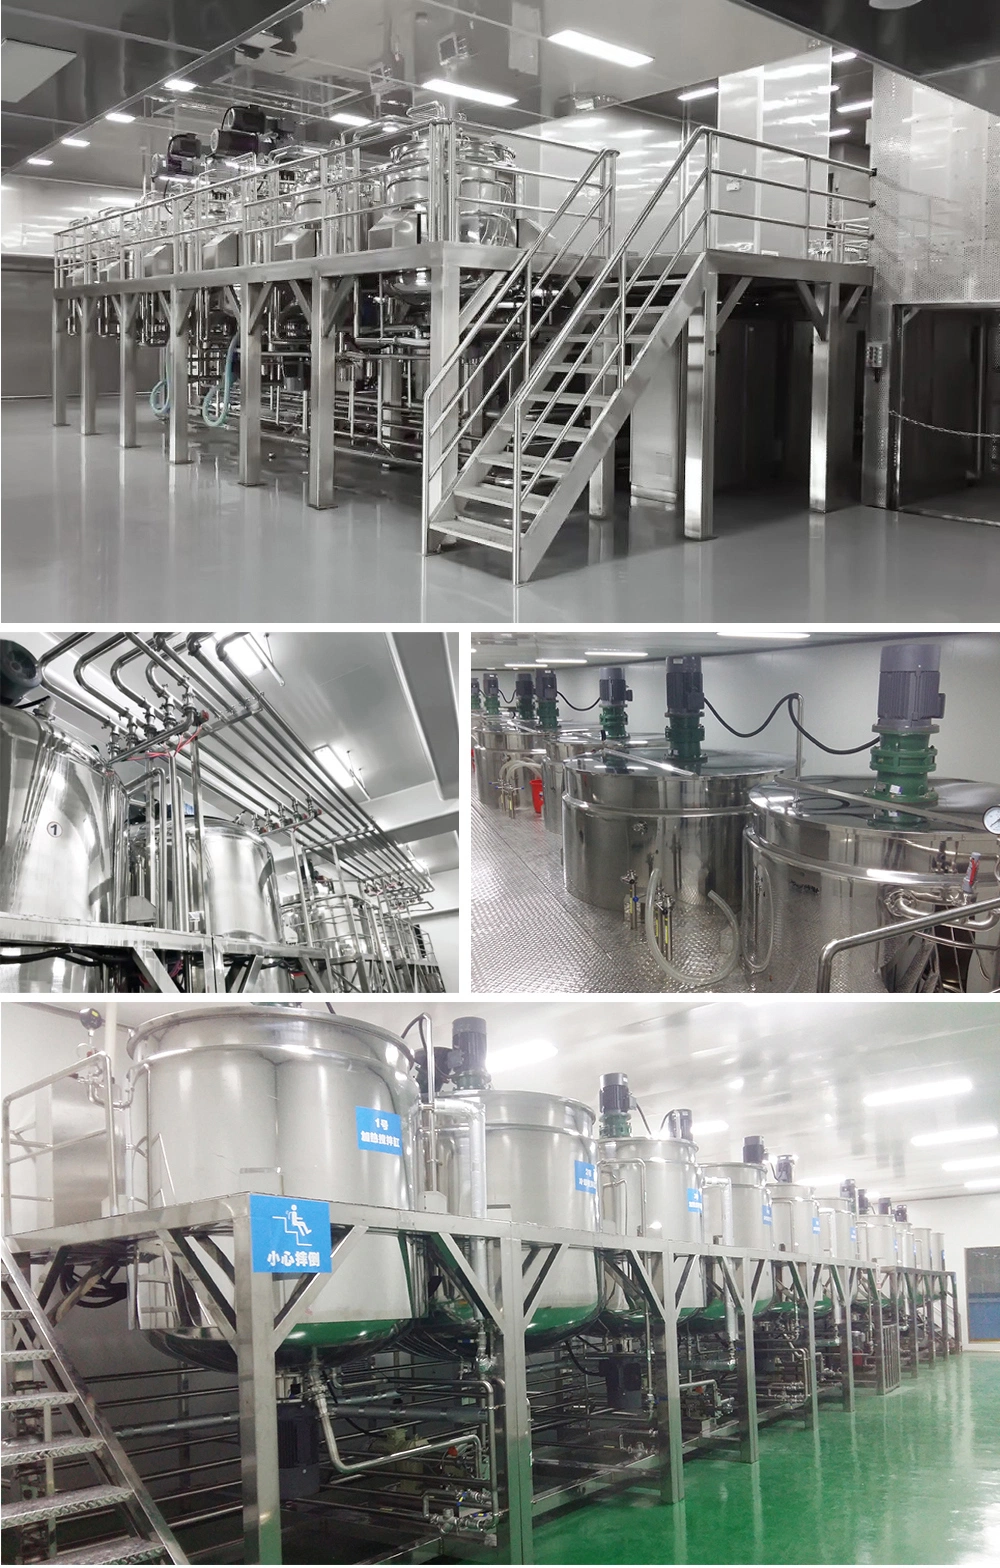 500L 1000L 2000L 3000L Stainless Steel Dairy Chemical Detergent Shampoo Hand Wash Liquid Soap Mixing Blending Mixer Tank with Homogenizer Heating